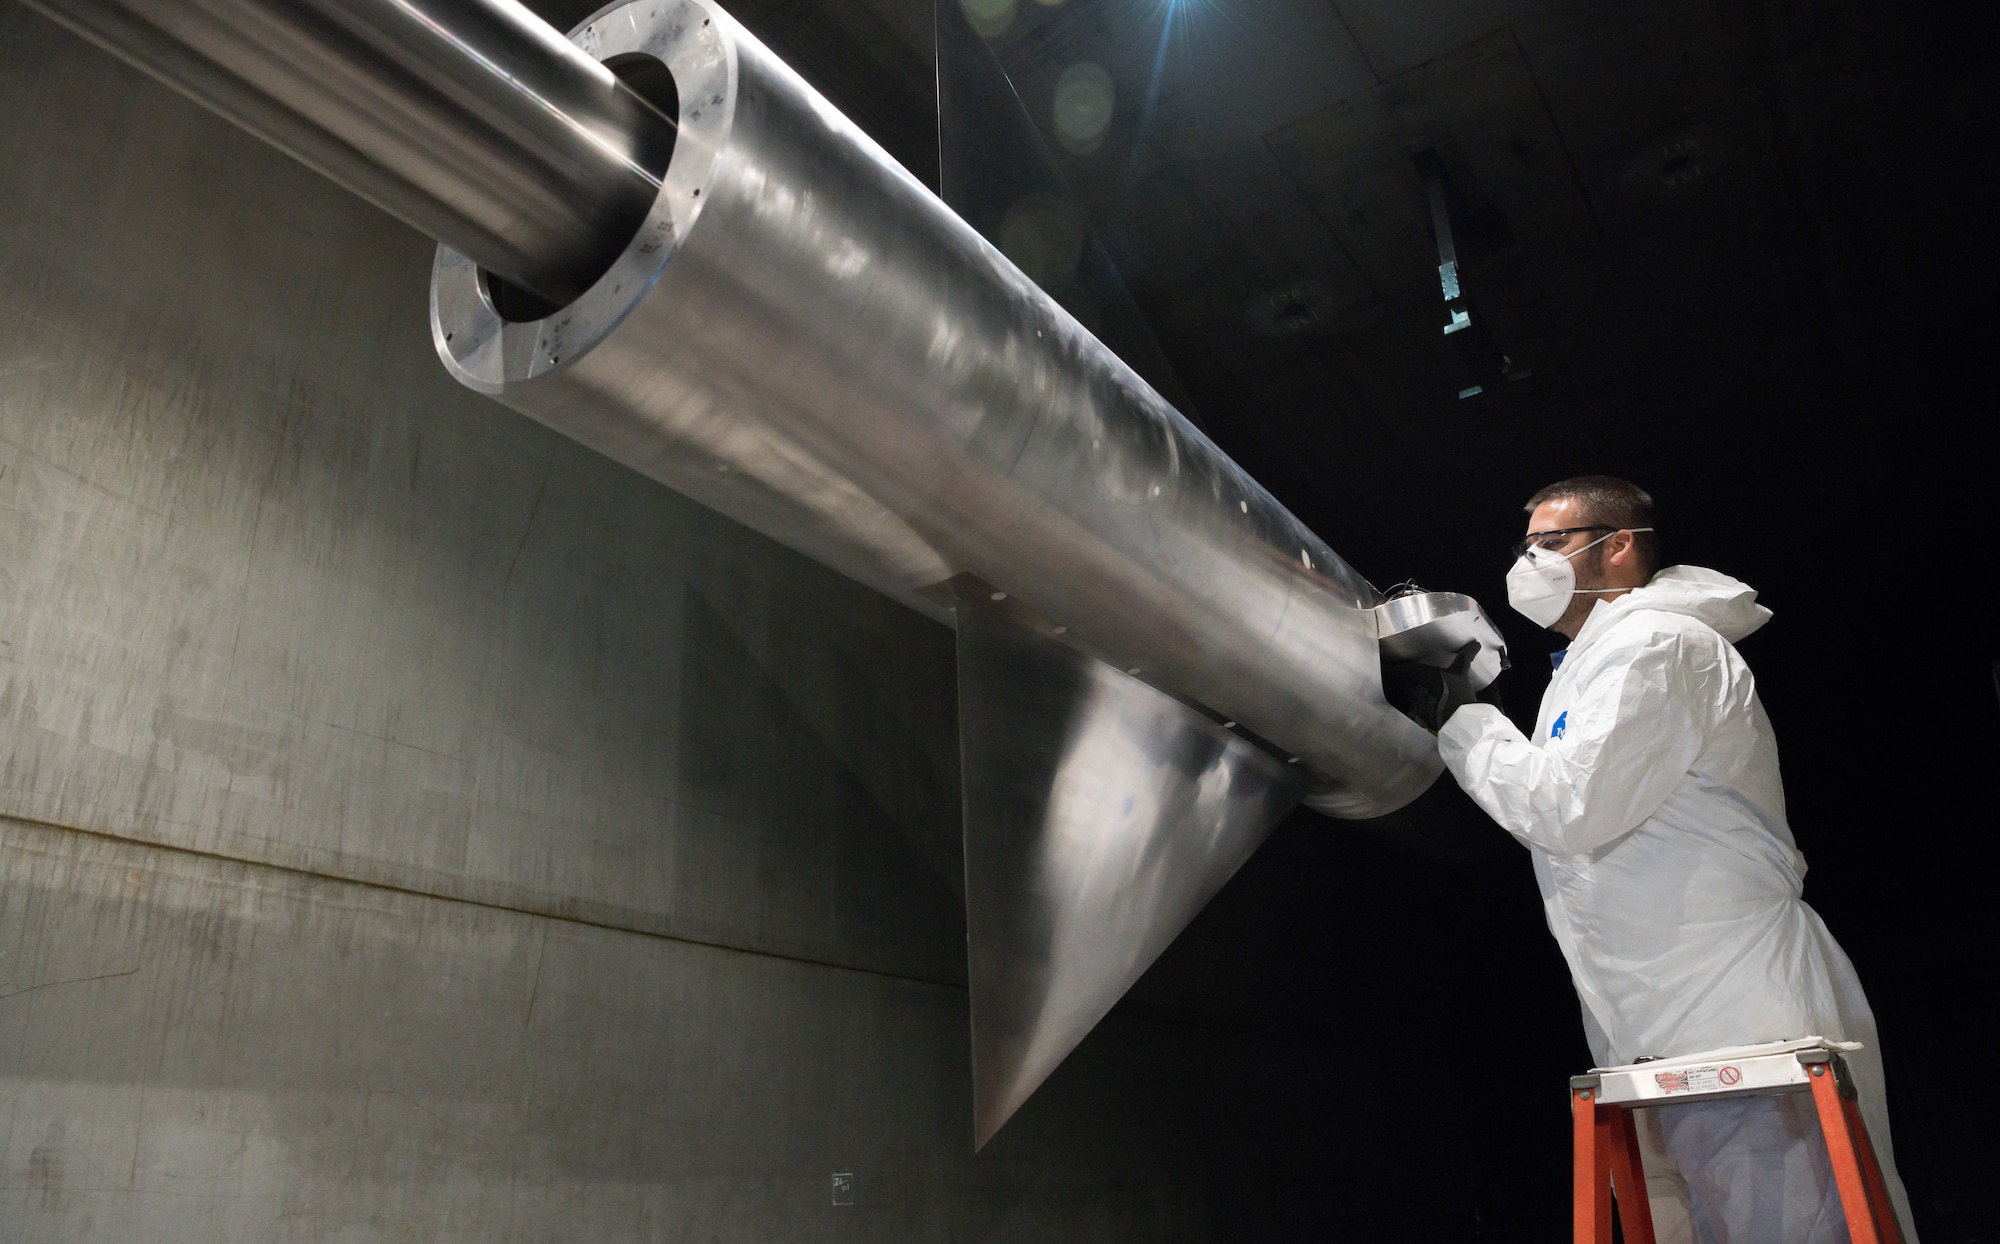 Bradley Rogers, lead outside machinist, removes a hatch to access the interior of an AGARD-B model in the 16-foot supersonic wind tunnel at Arnold Air Force Base, Tenn., Jan. 18, 2021. (U.S. Air Force photo by Jill Pickett)